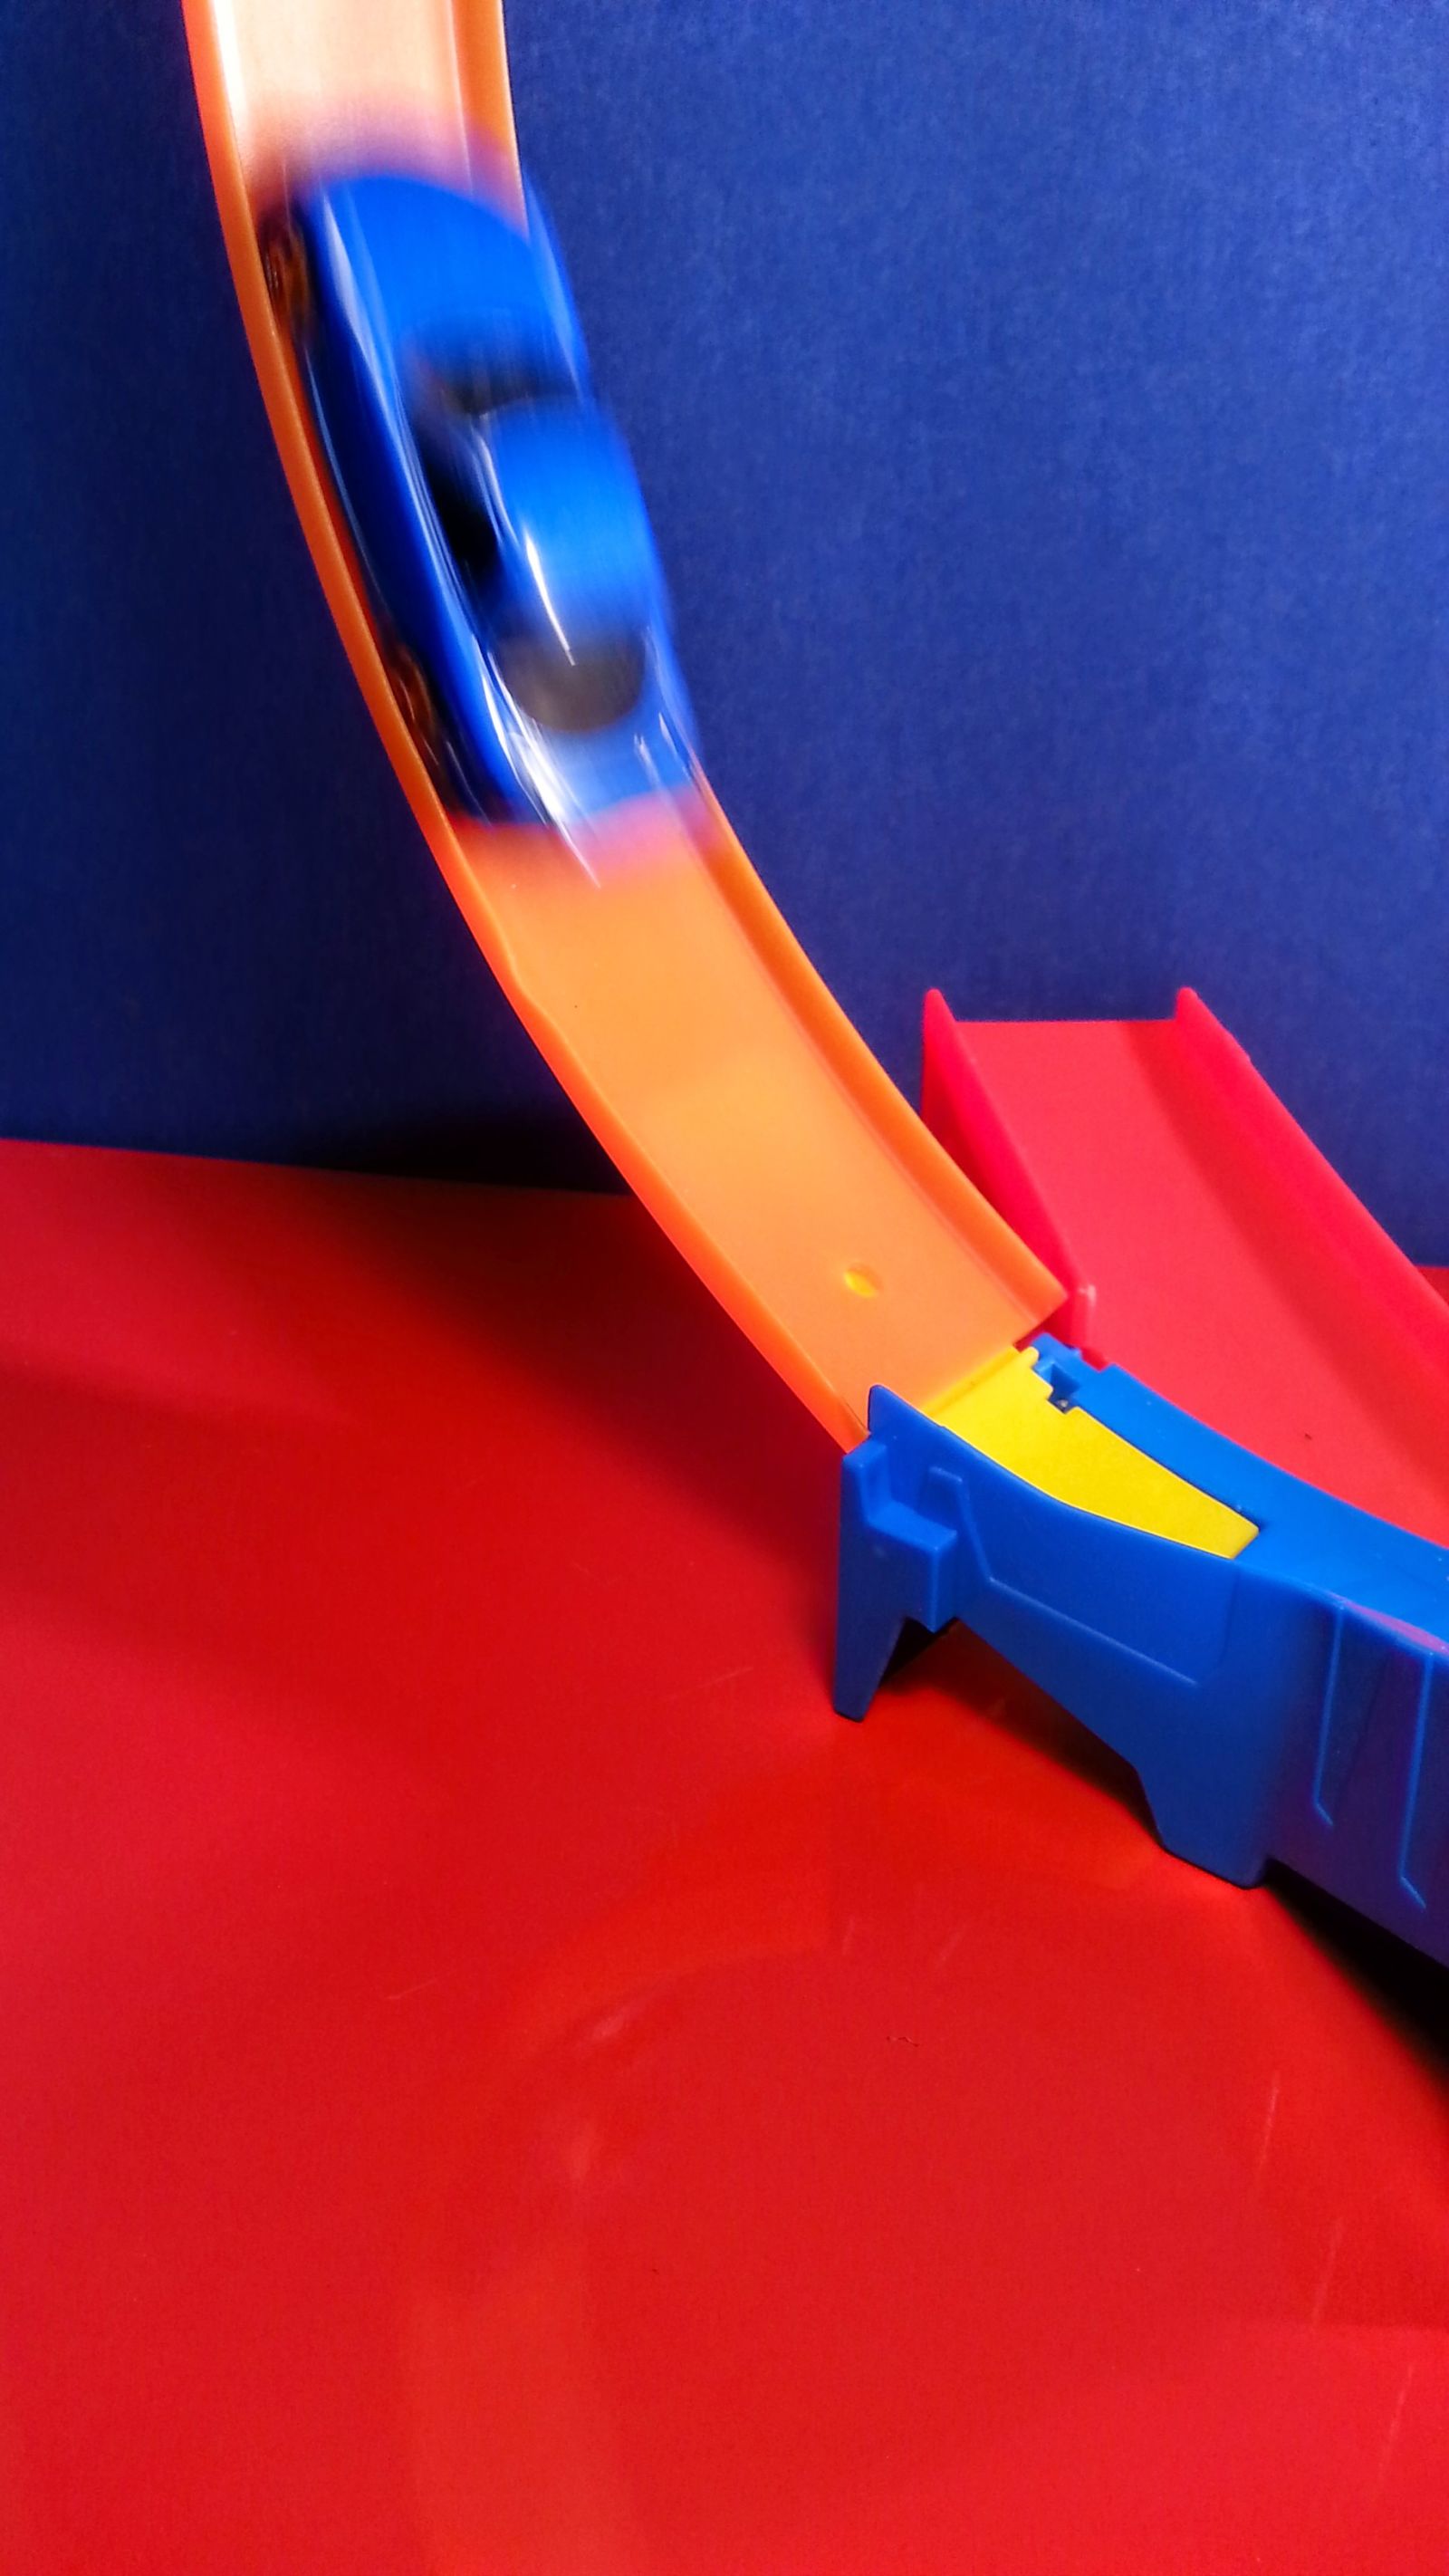 Illustration for article titled Review: This Modern Hot Wheel Track is Rubbish